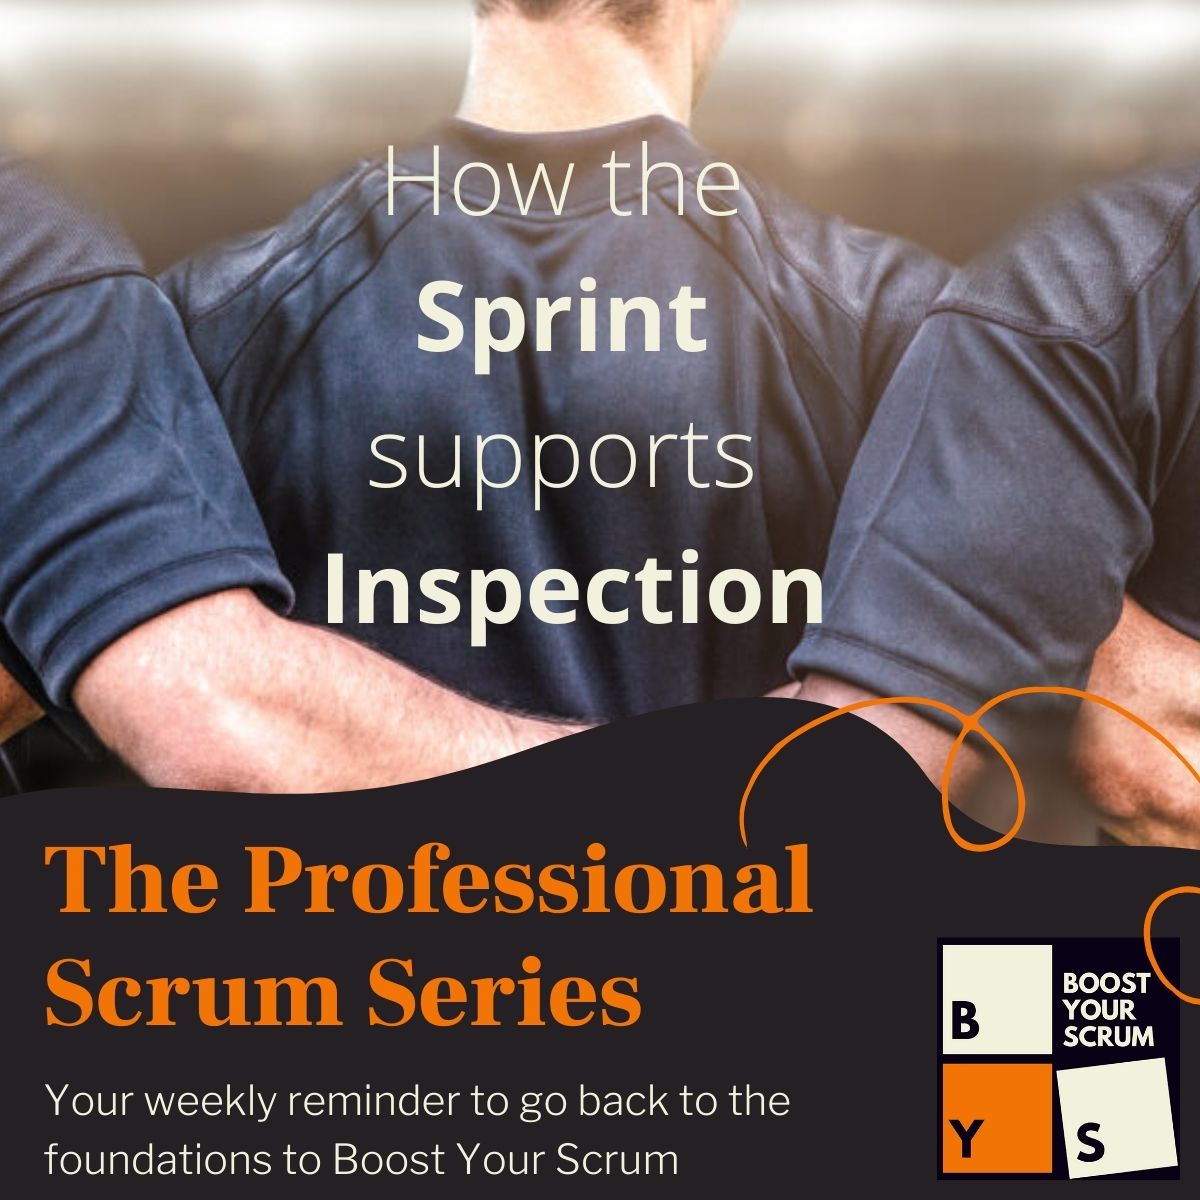  How the Sprint itself supports Inspection